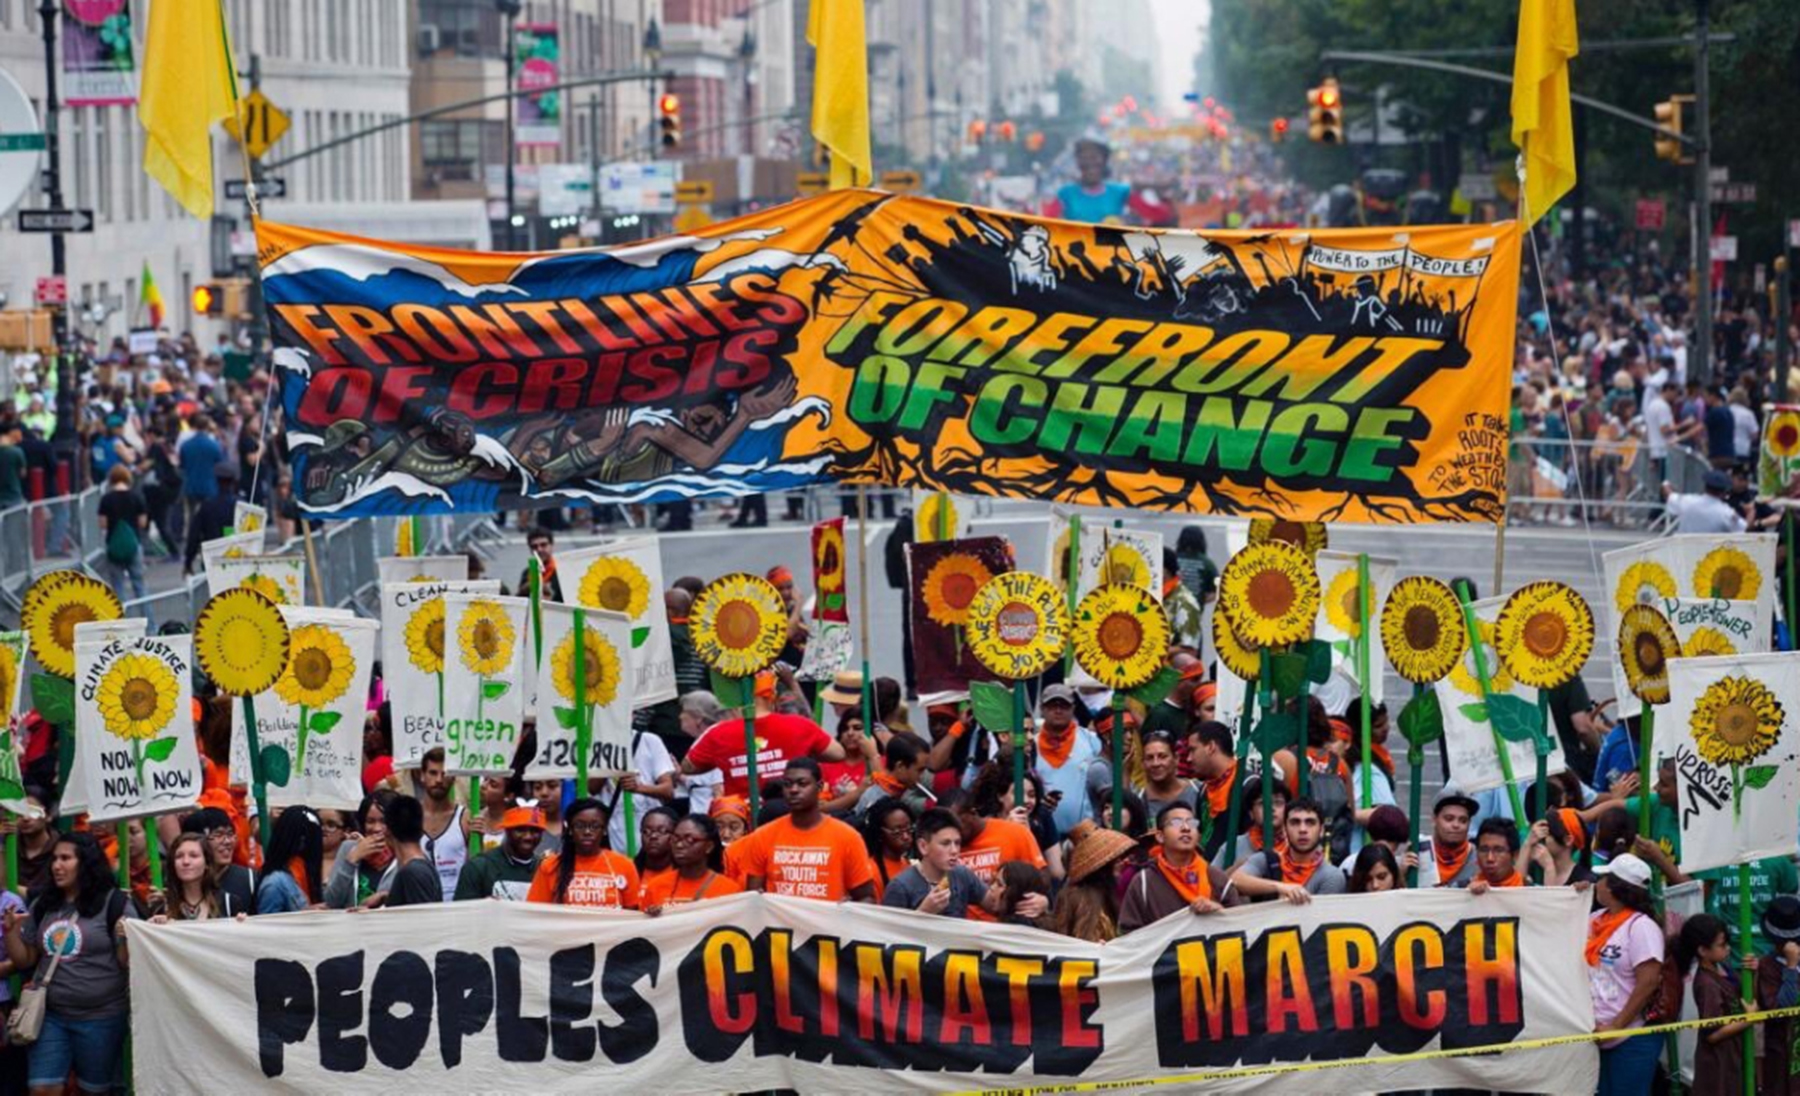 Unions are all in for People’s Climate March, April 29